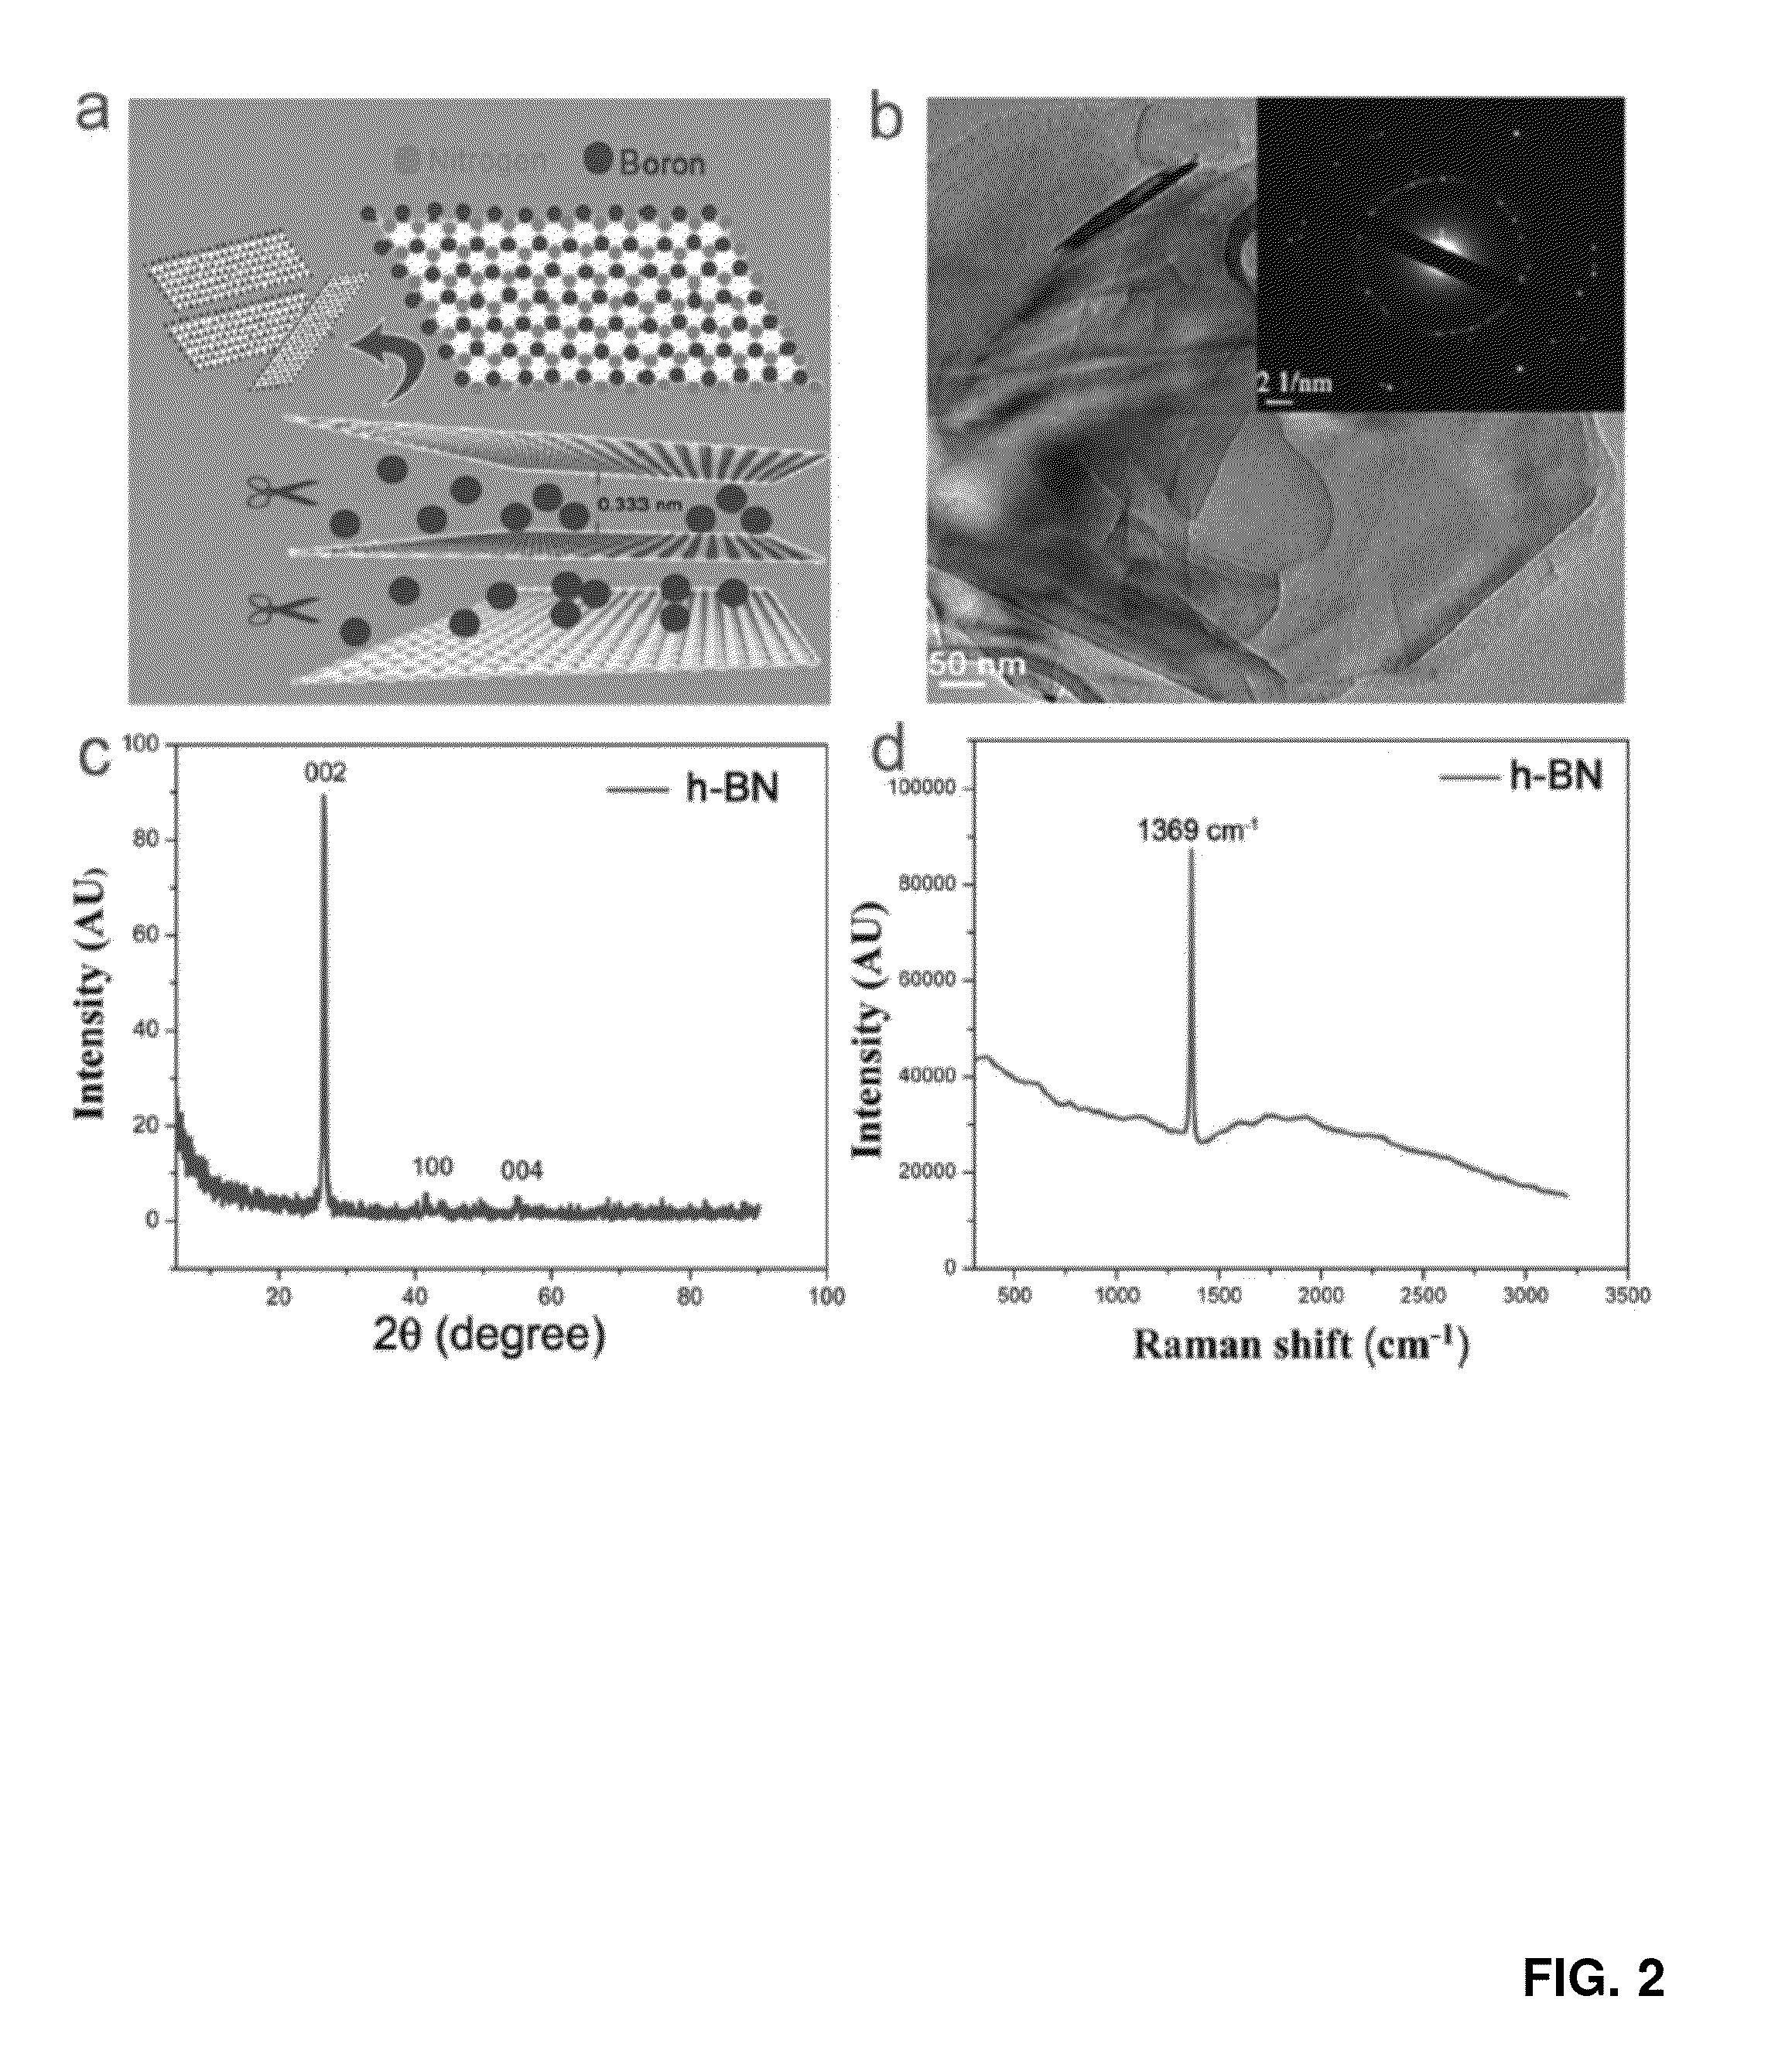 Boron nitride-based fluid compositions and methods of making the same